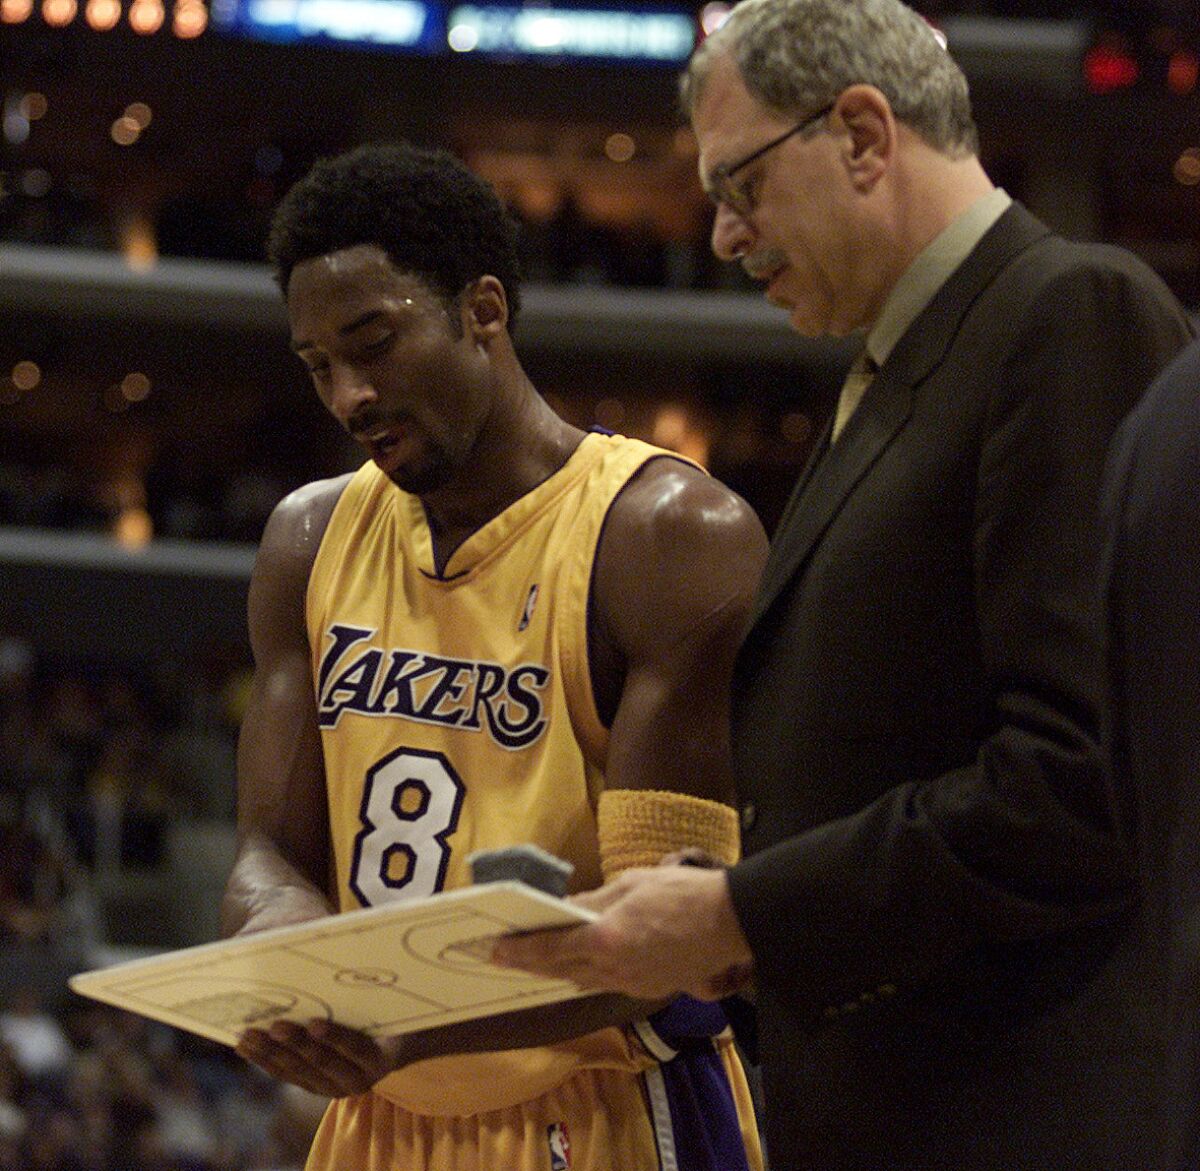 Phil Jackson talks strategy with Kobe during a game in 2000. (Bryan Chan / Los Angeles Times)